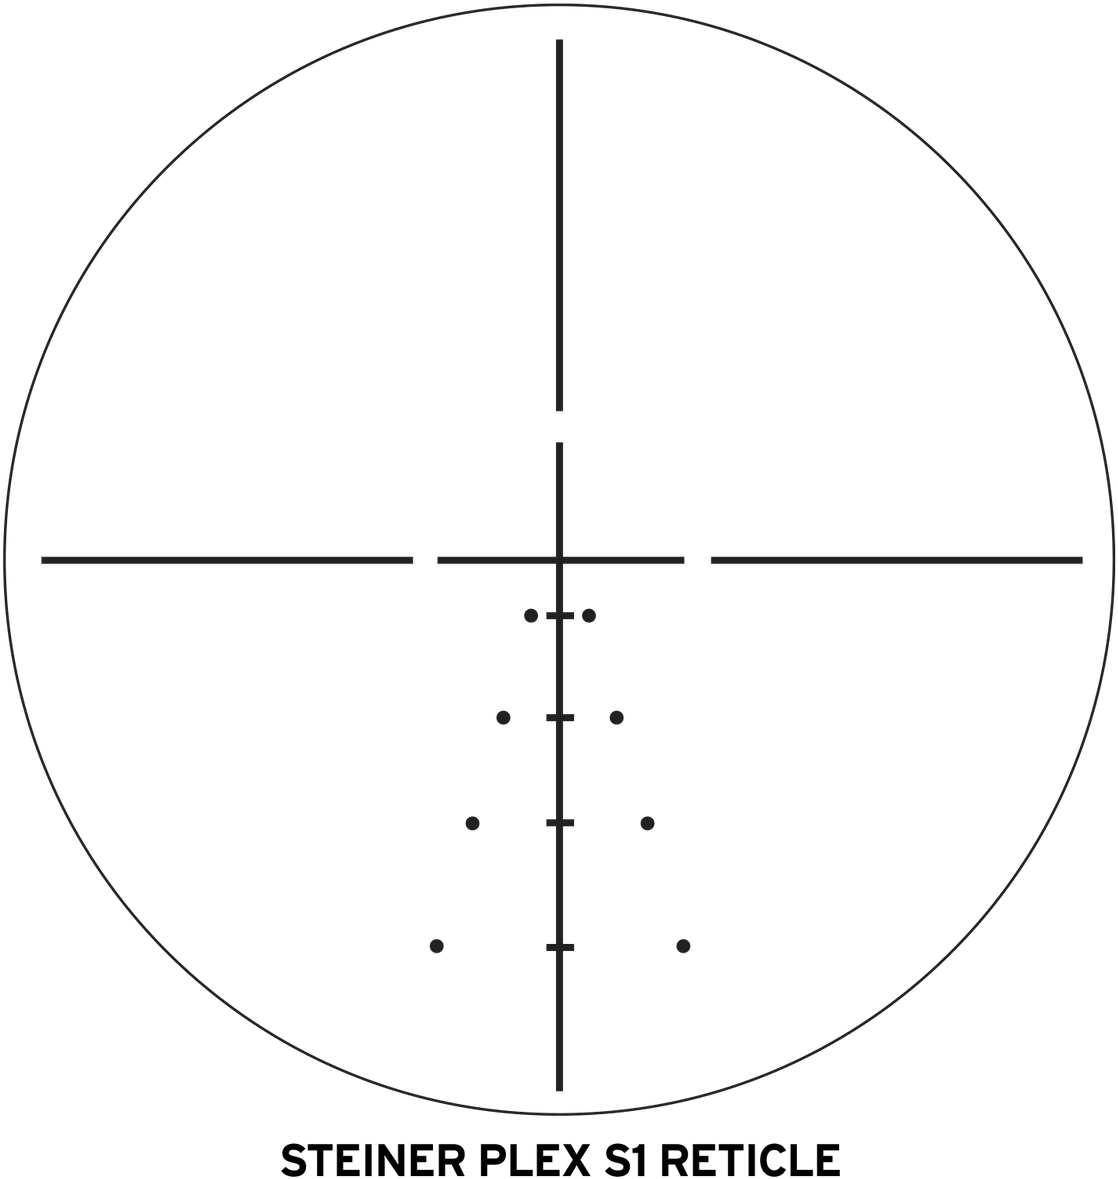 Steiner 5012 Gs3 4-20x50 Riflescope W/ 4a Reticle - Steiner Gs3 4 20x50mm Scope S1 Reticle (1192x1280), Png Download